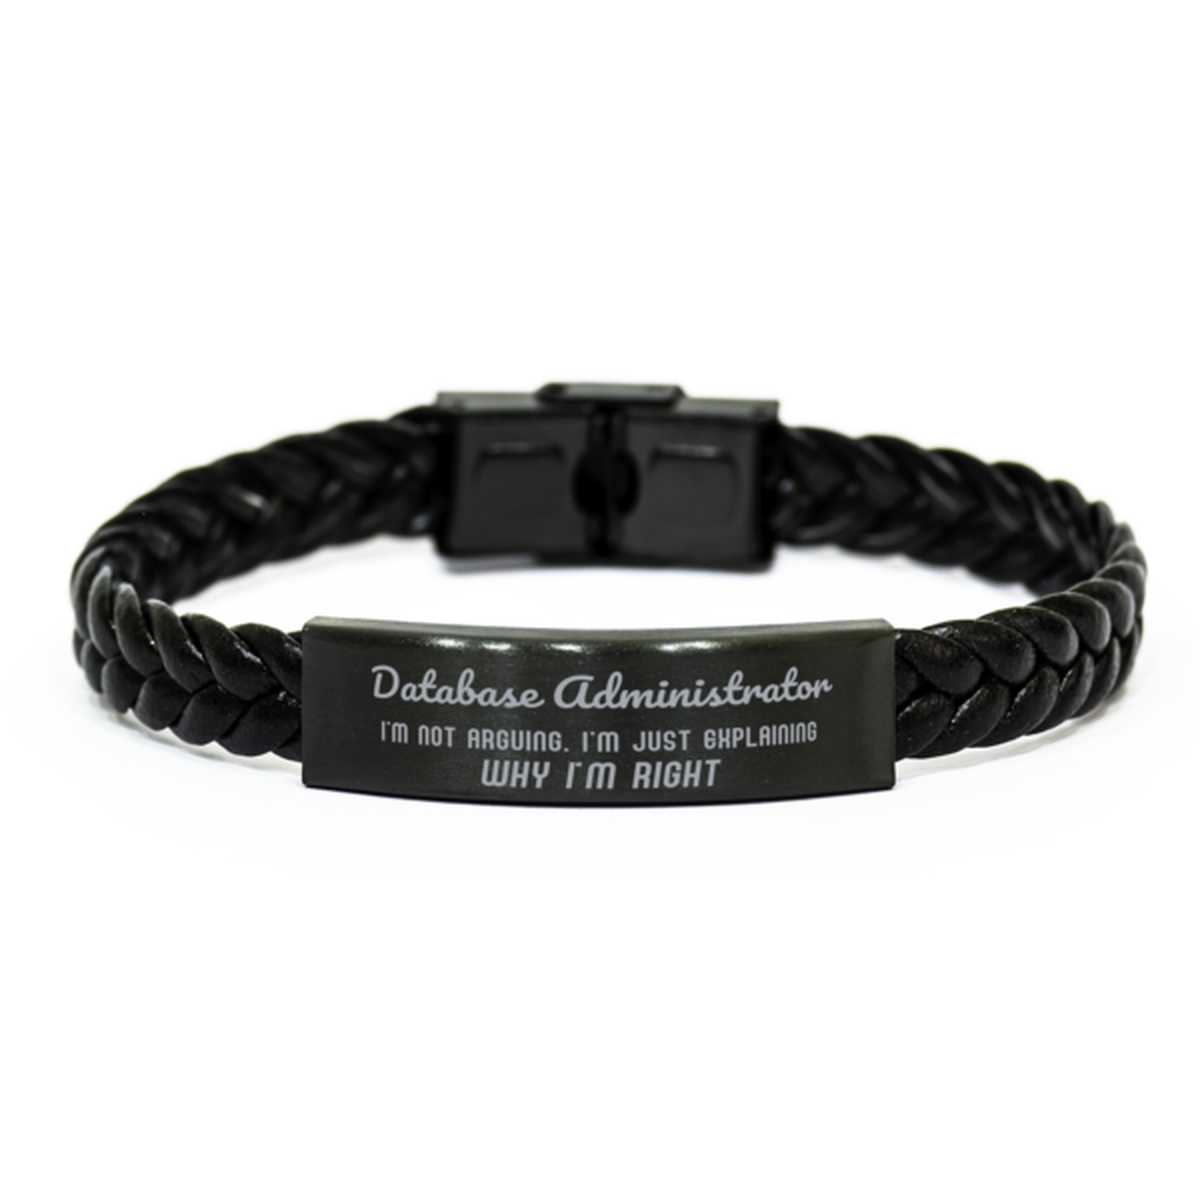 Database Administrator I'm not Arguing. I'm Just Explaining Why I'm RIGHT Braided Leather Bracelet, Graduation Birthday Christmas Database Administrator Gifts For Database Administrator Funny Saying Quote Present for Men Women Coworker